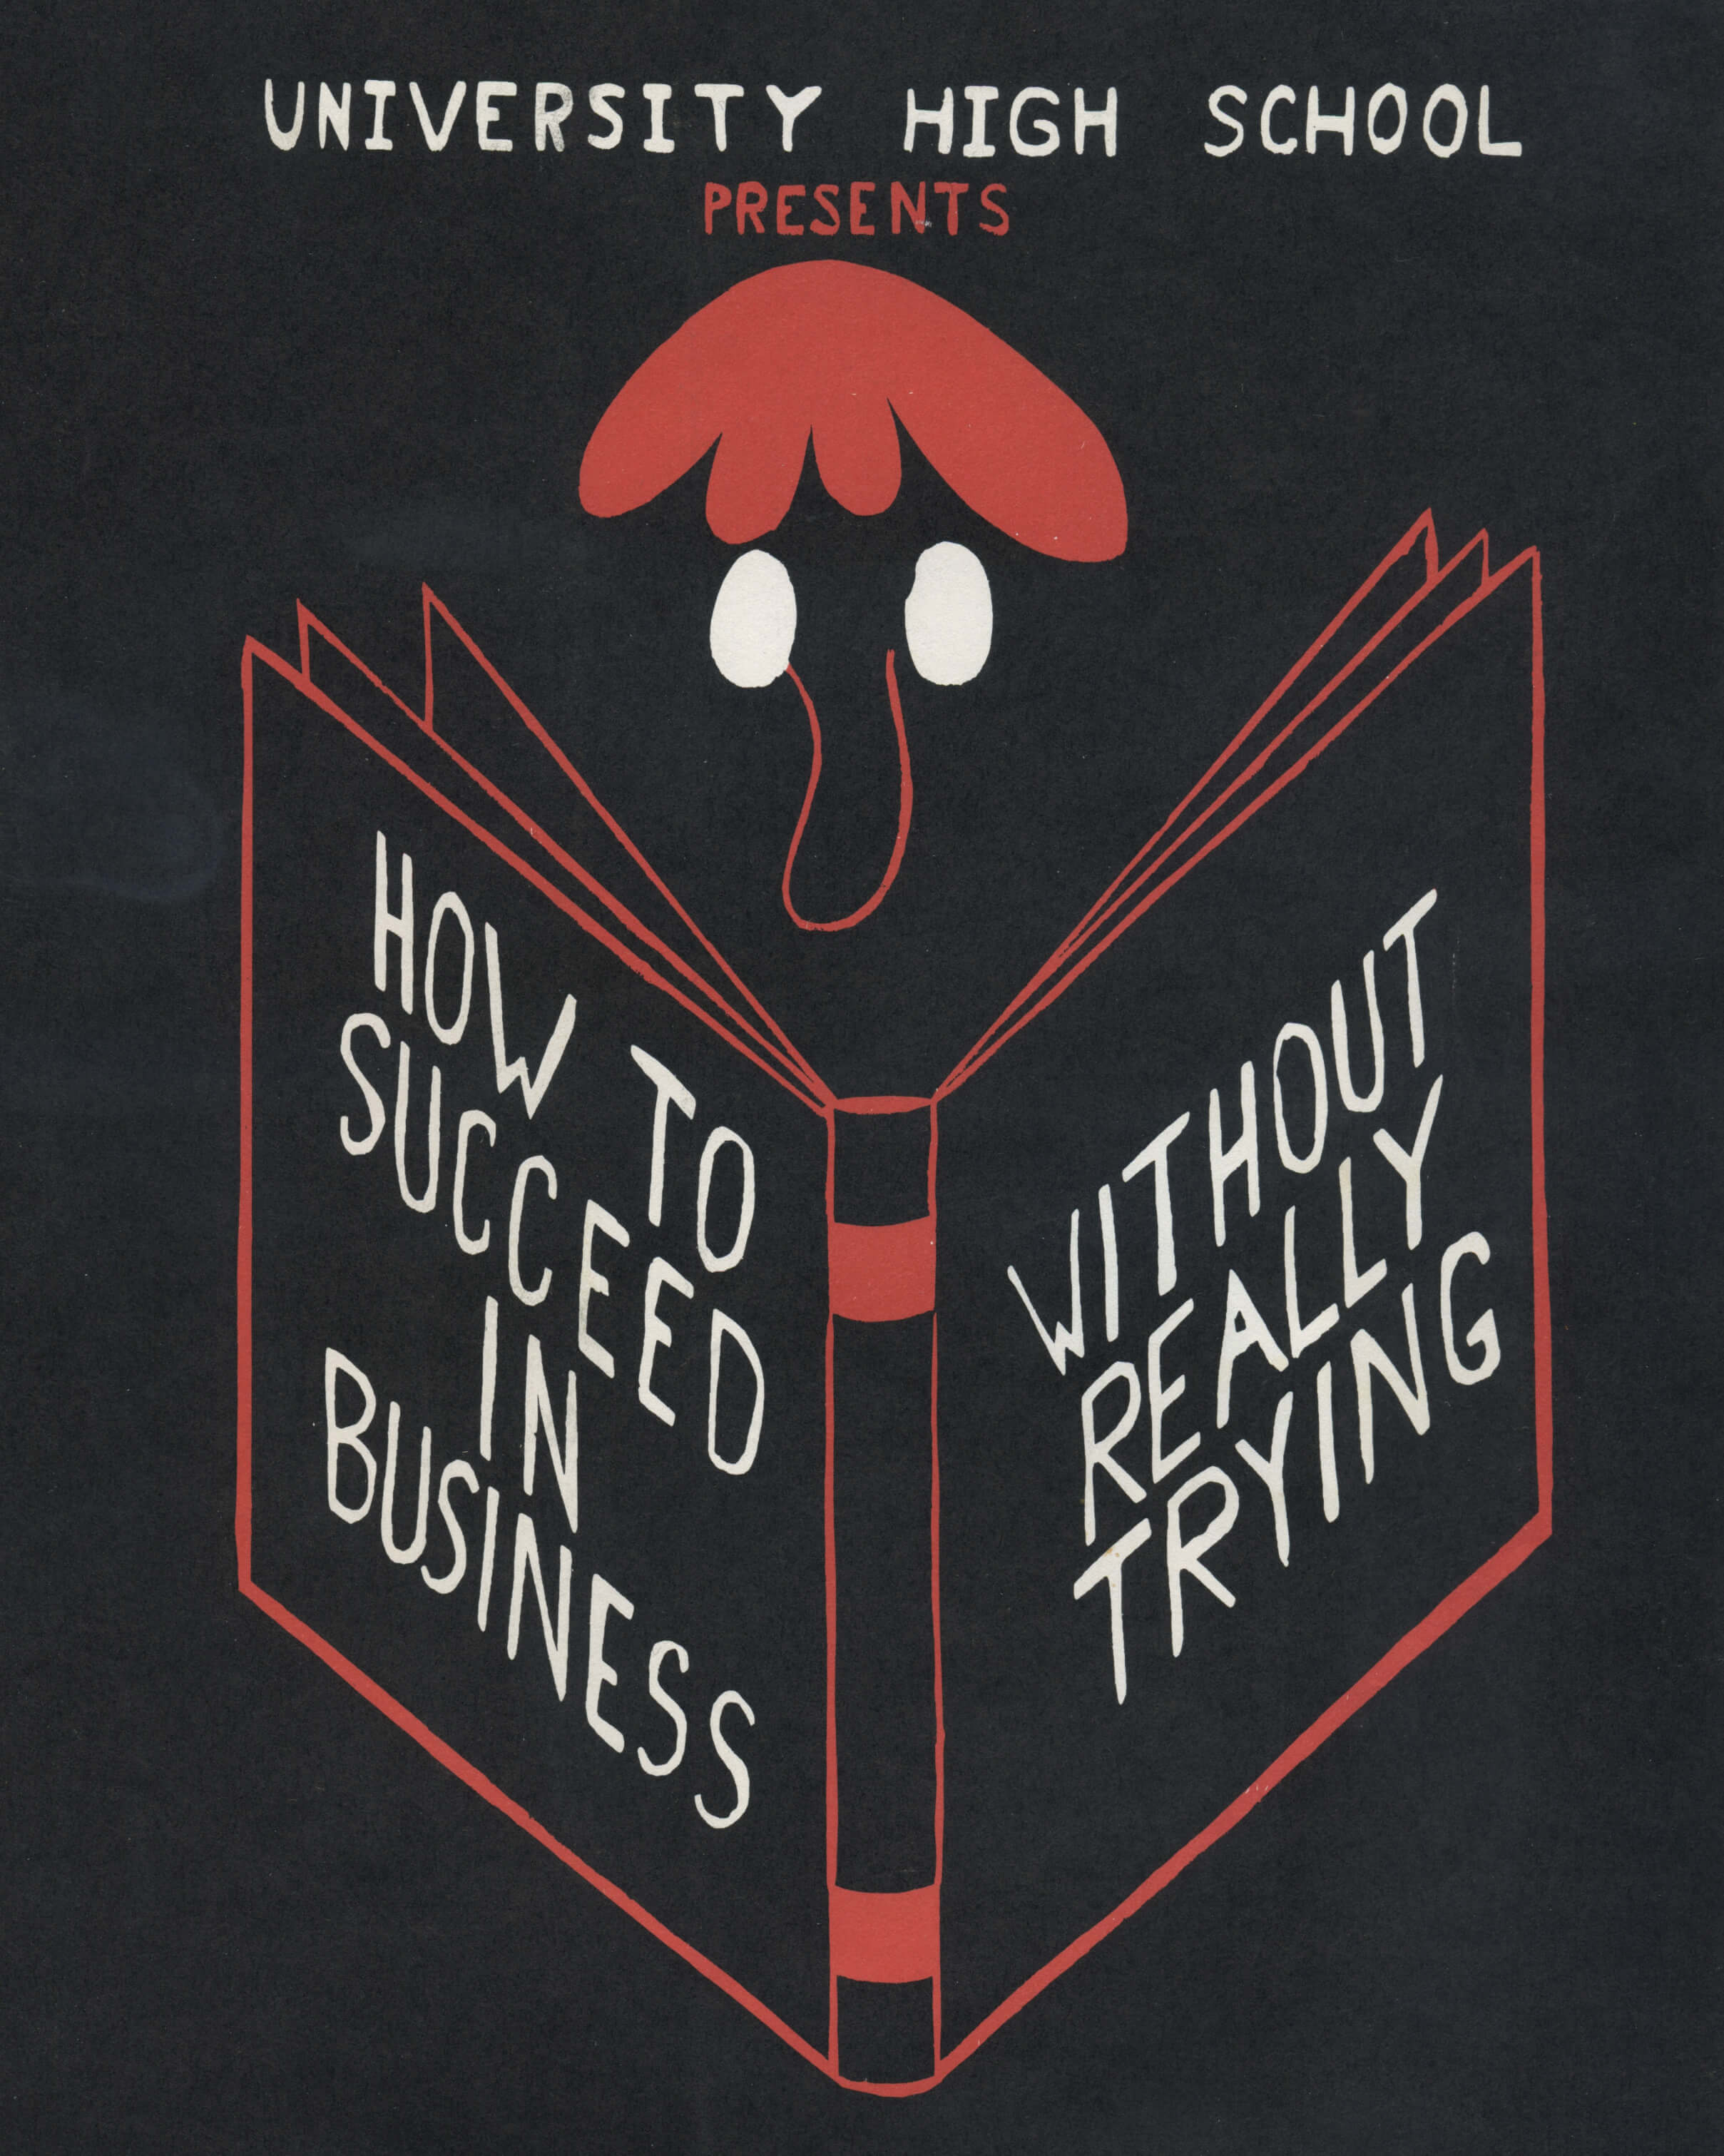 Cover of a high school play bill: "University High School Presents How to Succeed in Business Without Really Trying."